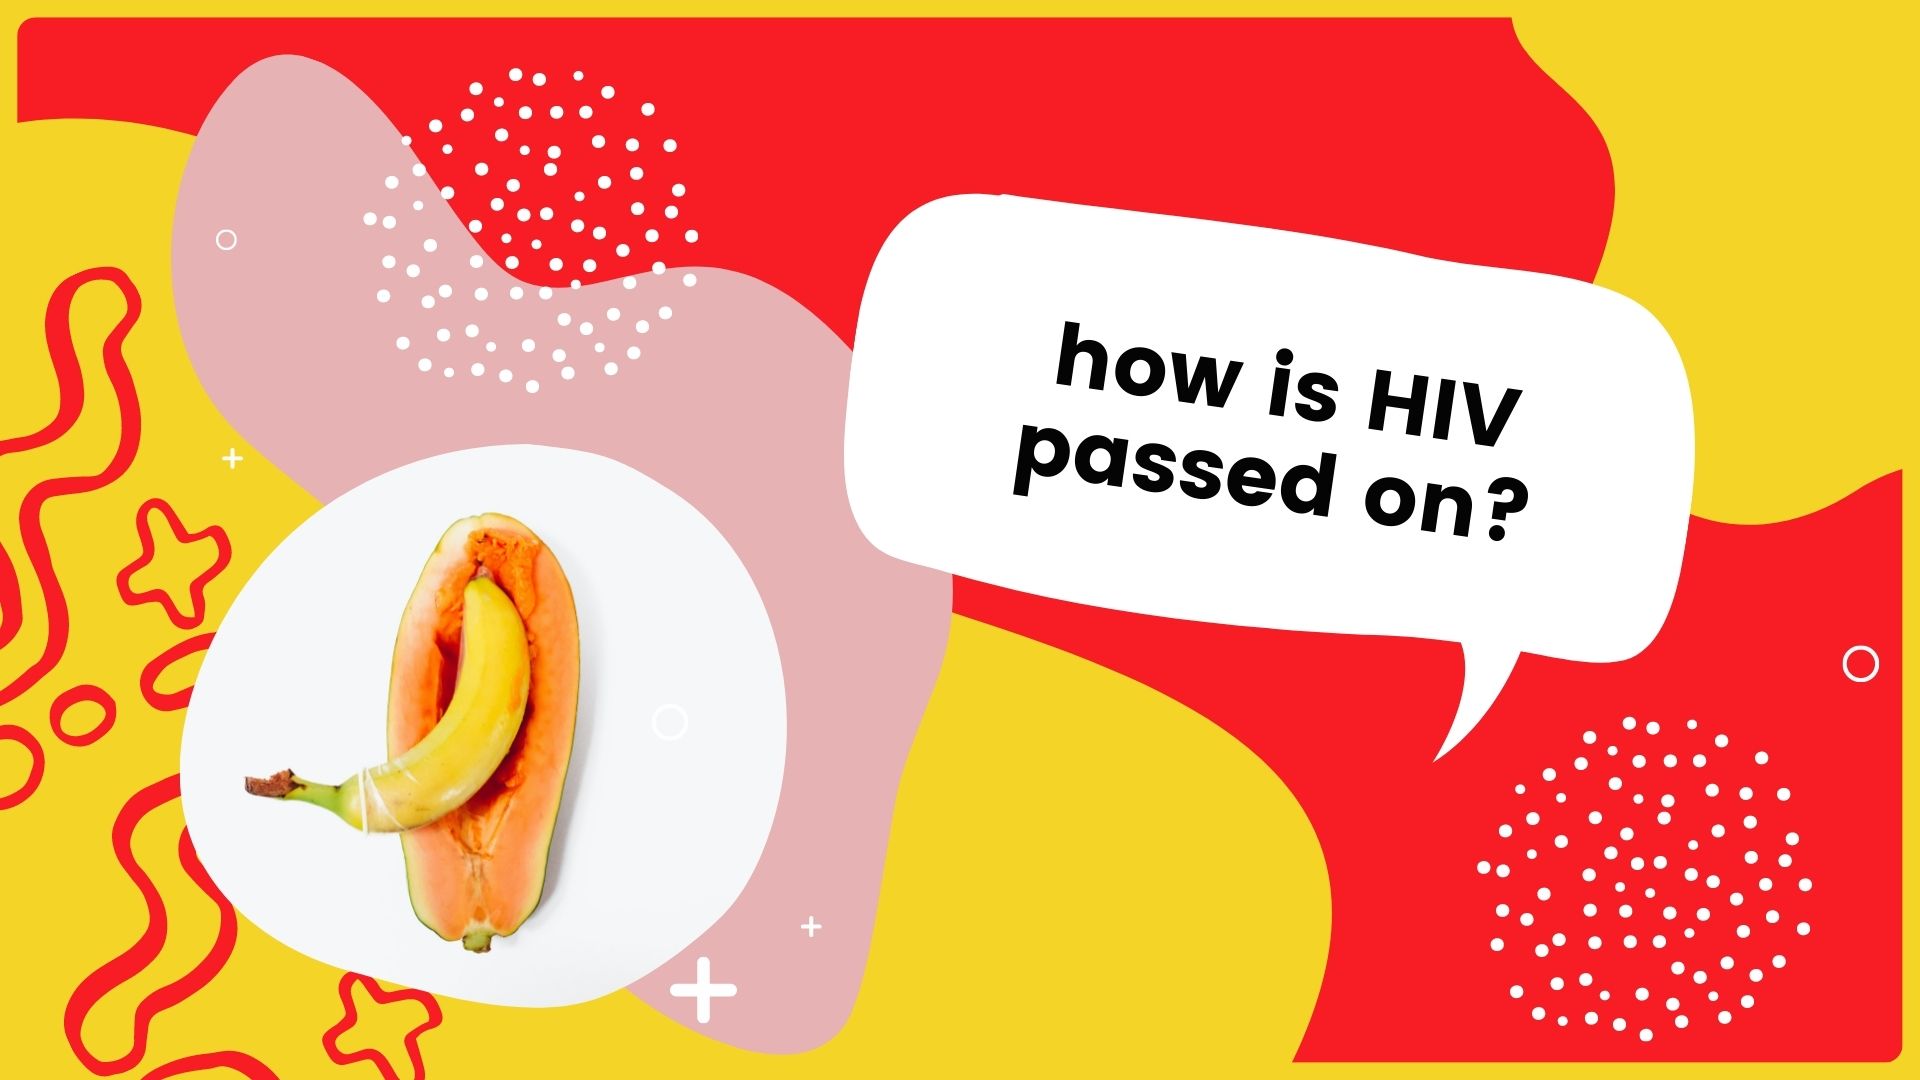 How is HIV passed on?